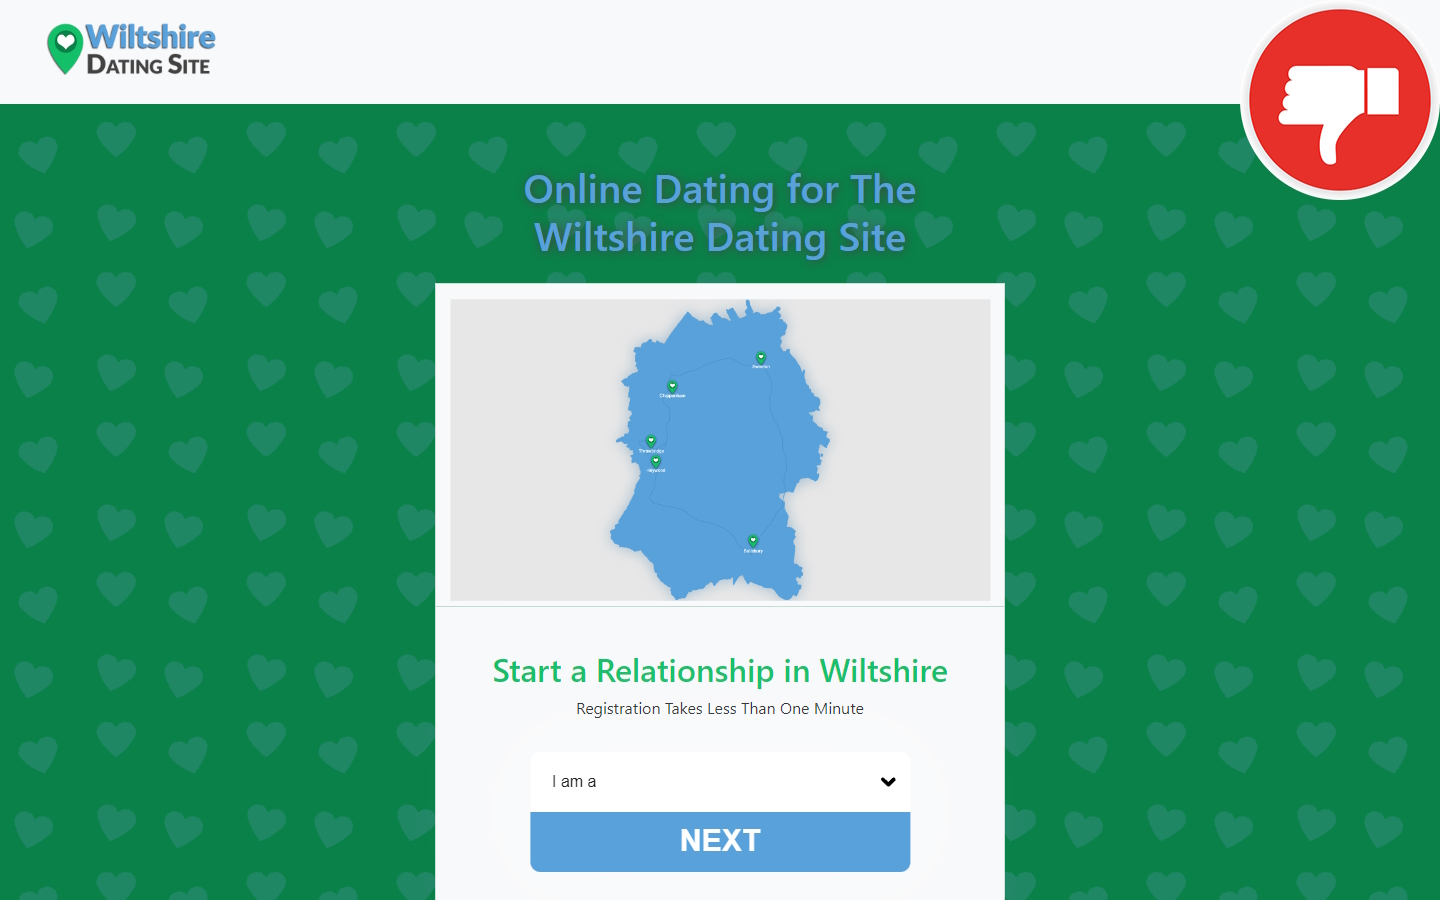 Review WiltshireDatingSite.co.uk Scam